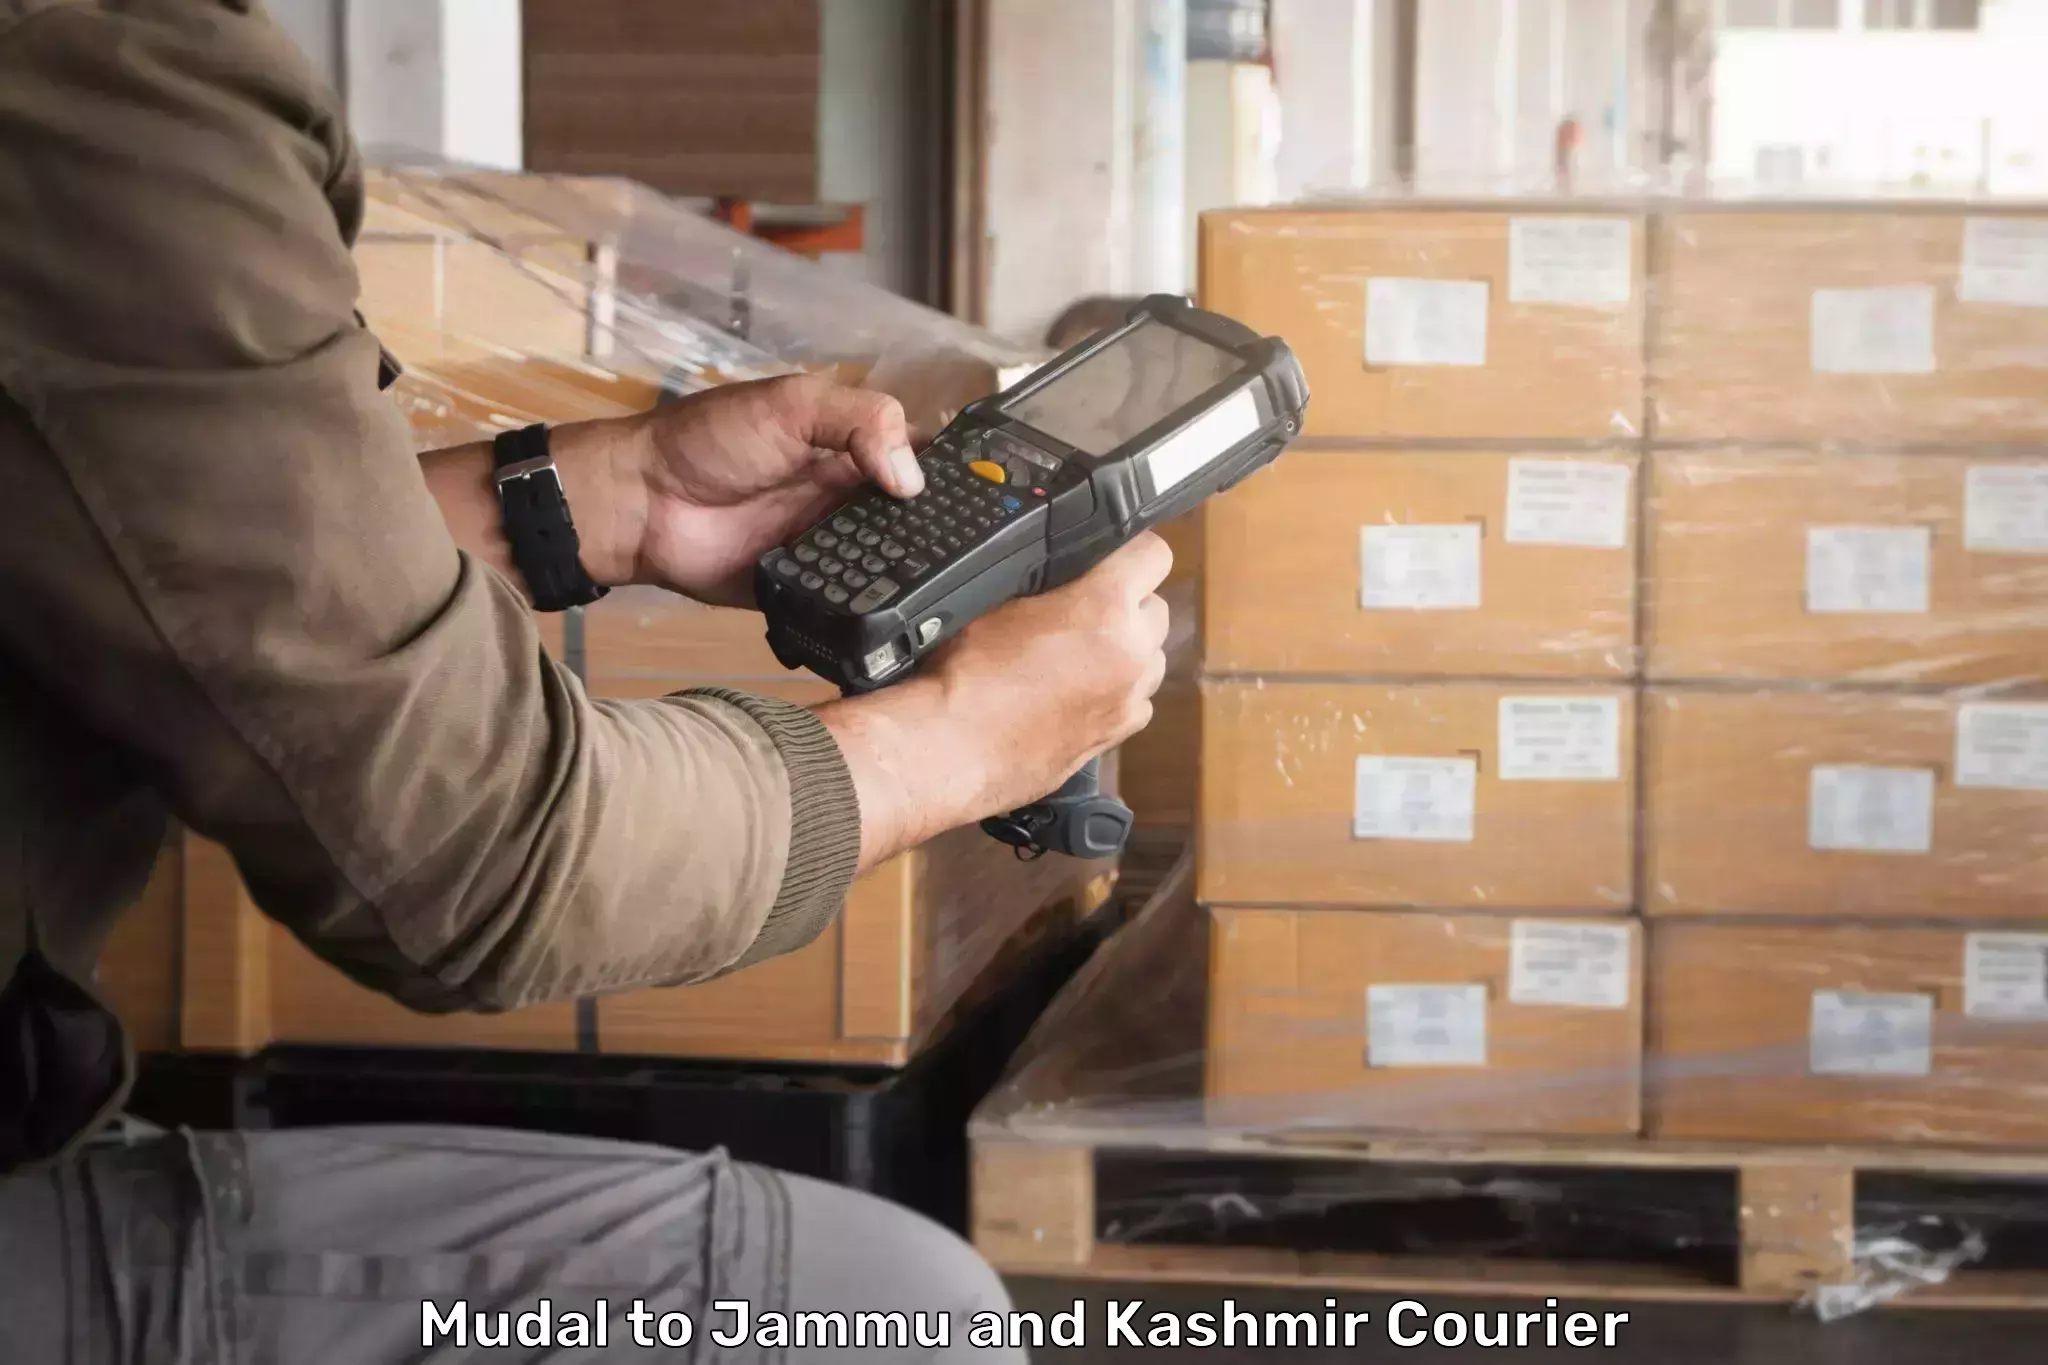 User-friendly delivery service Mudal to Jammu and Kashmir